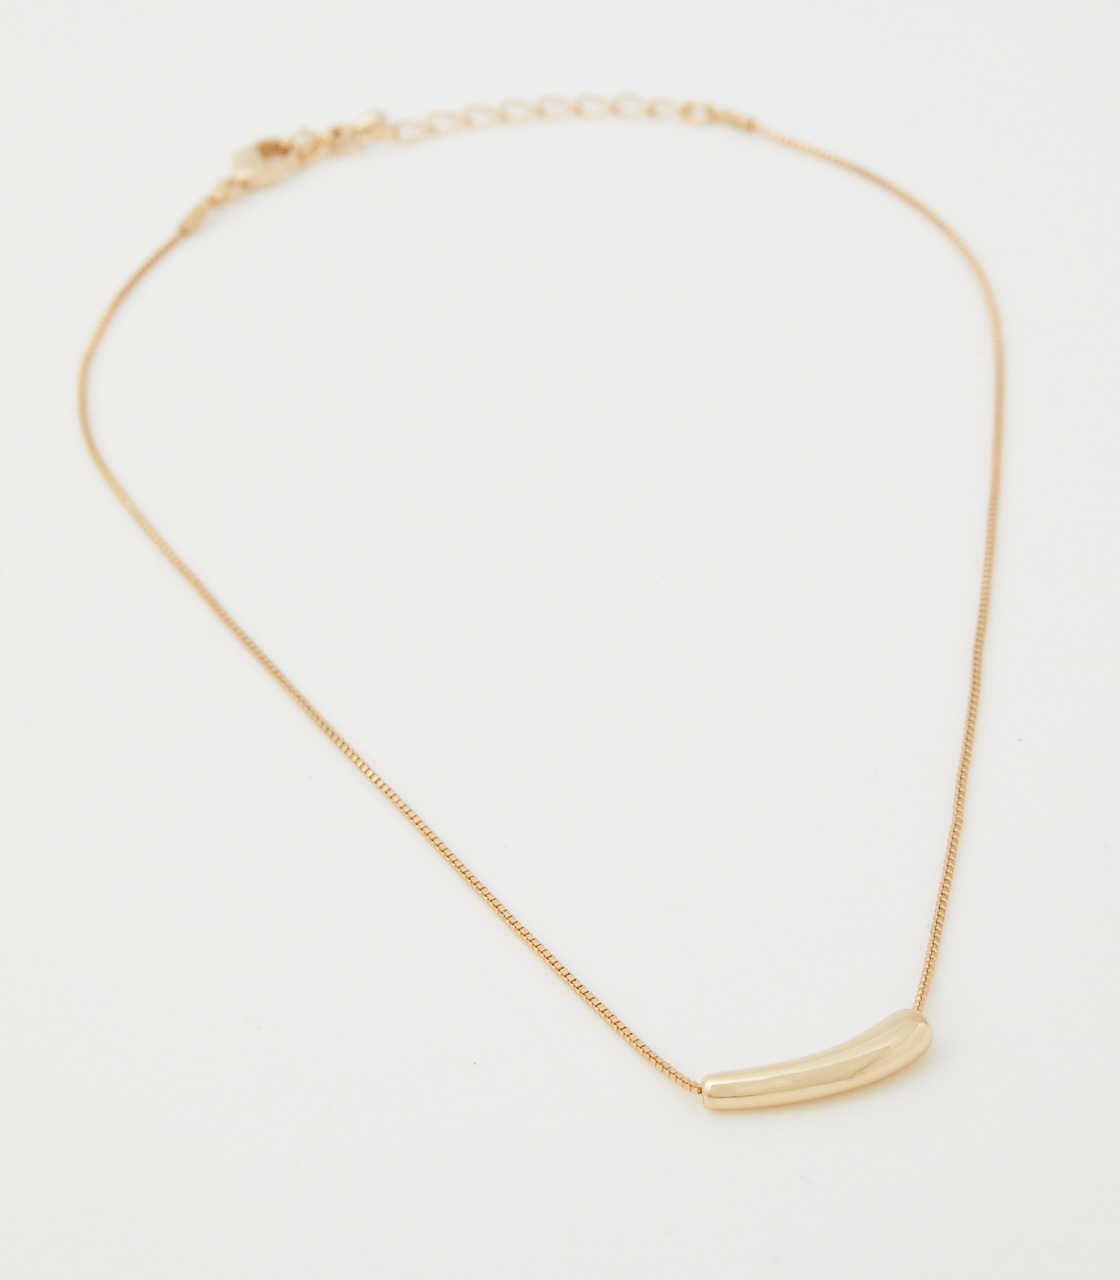 SIMPLE POLE NECKLACE/シンプルポールネックレス 詳細画像 L/GLD 2